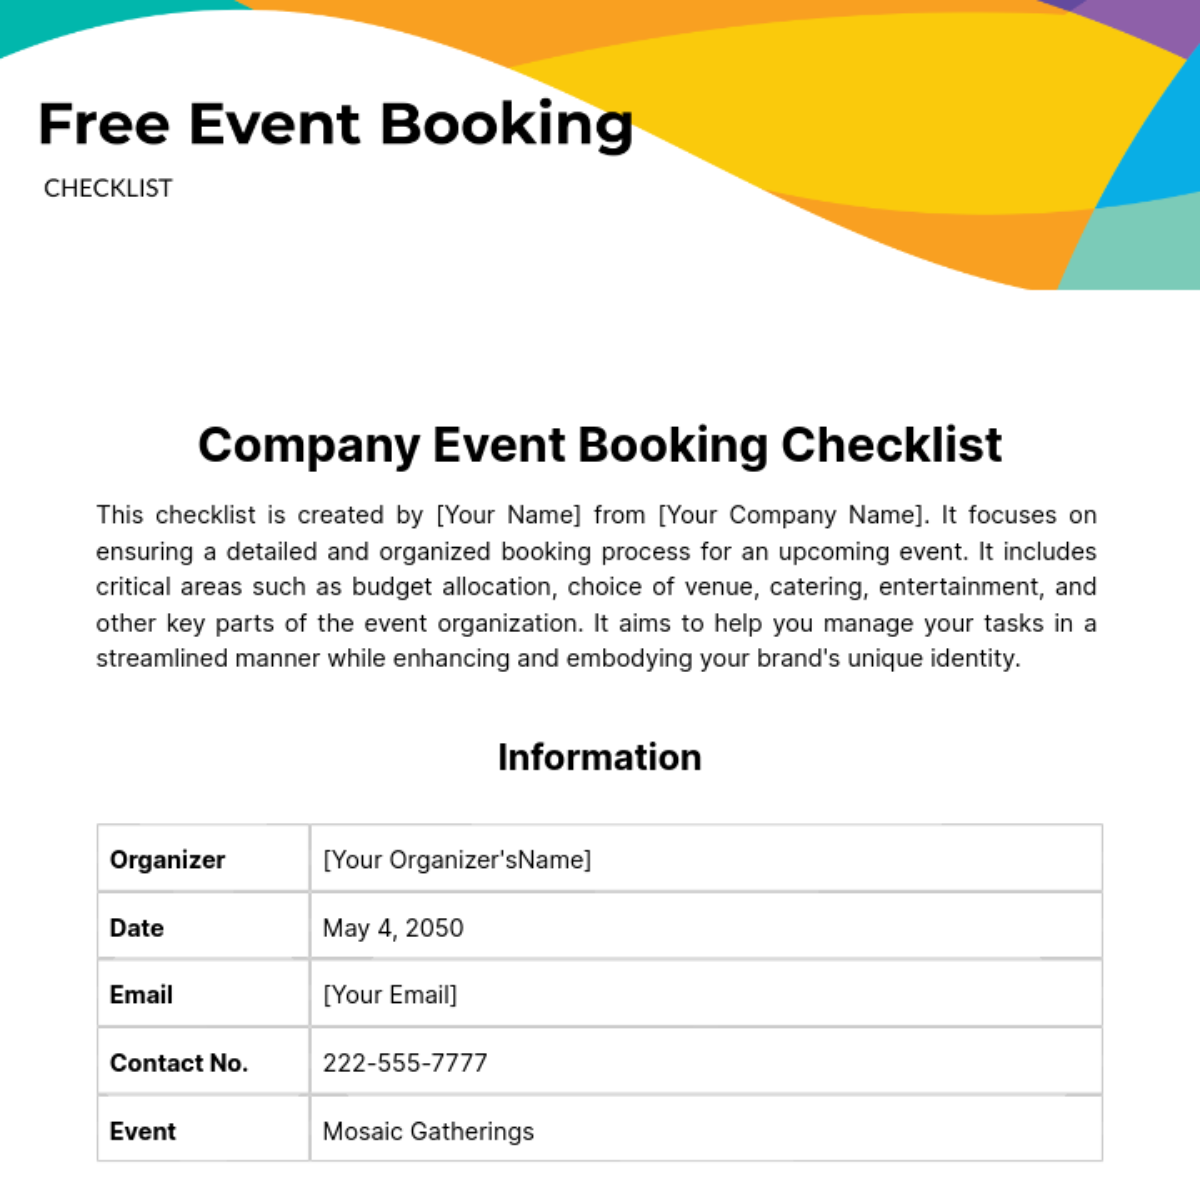 Free Event Booking Checklist Template